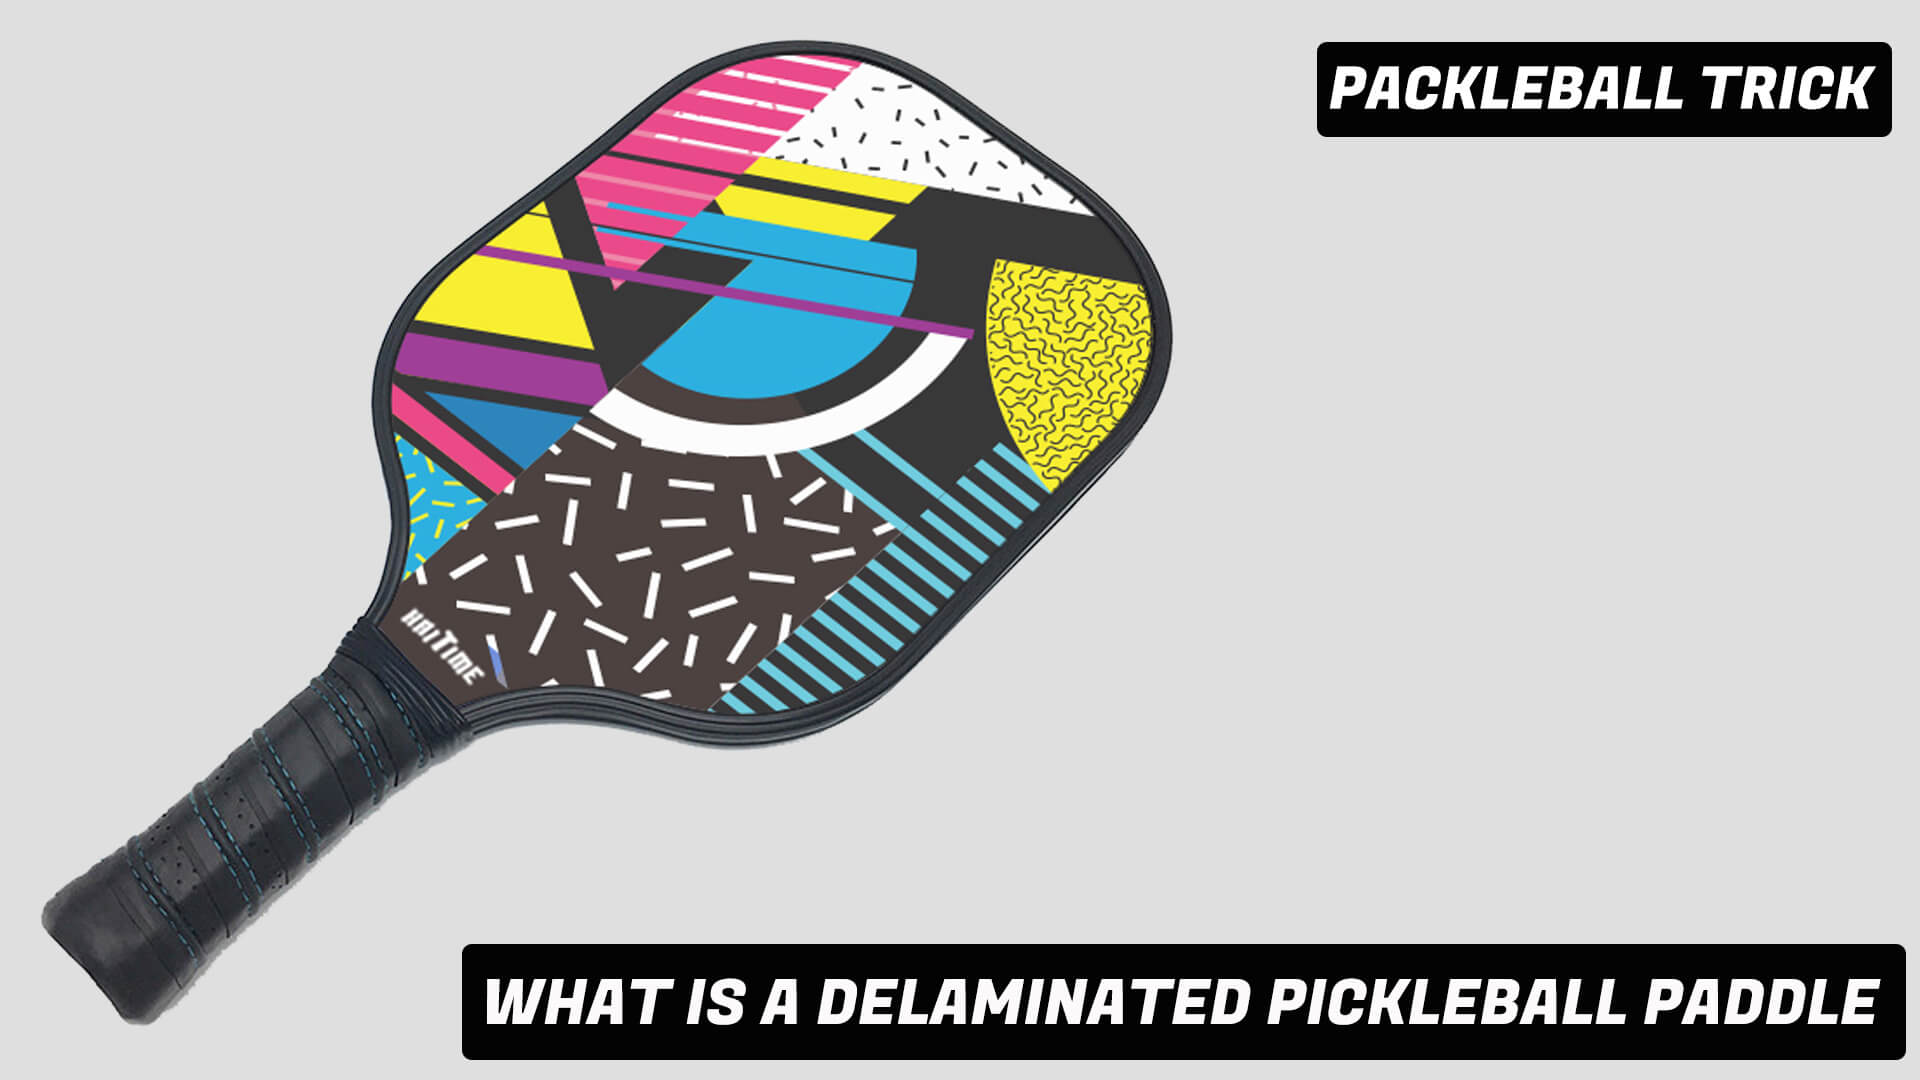 WHAT IS A DELAMINATED PICKLEBALL PADDLE